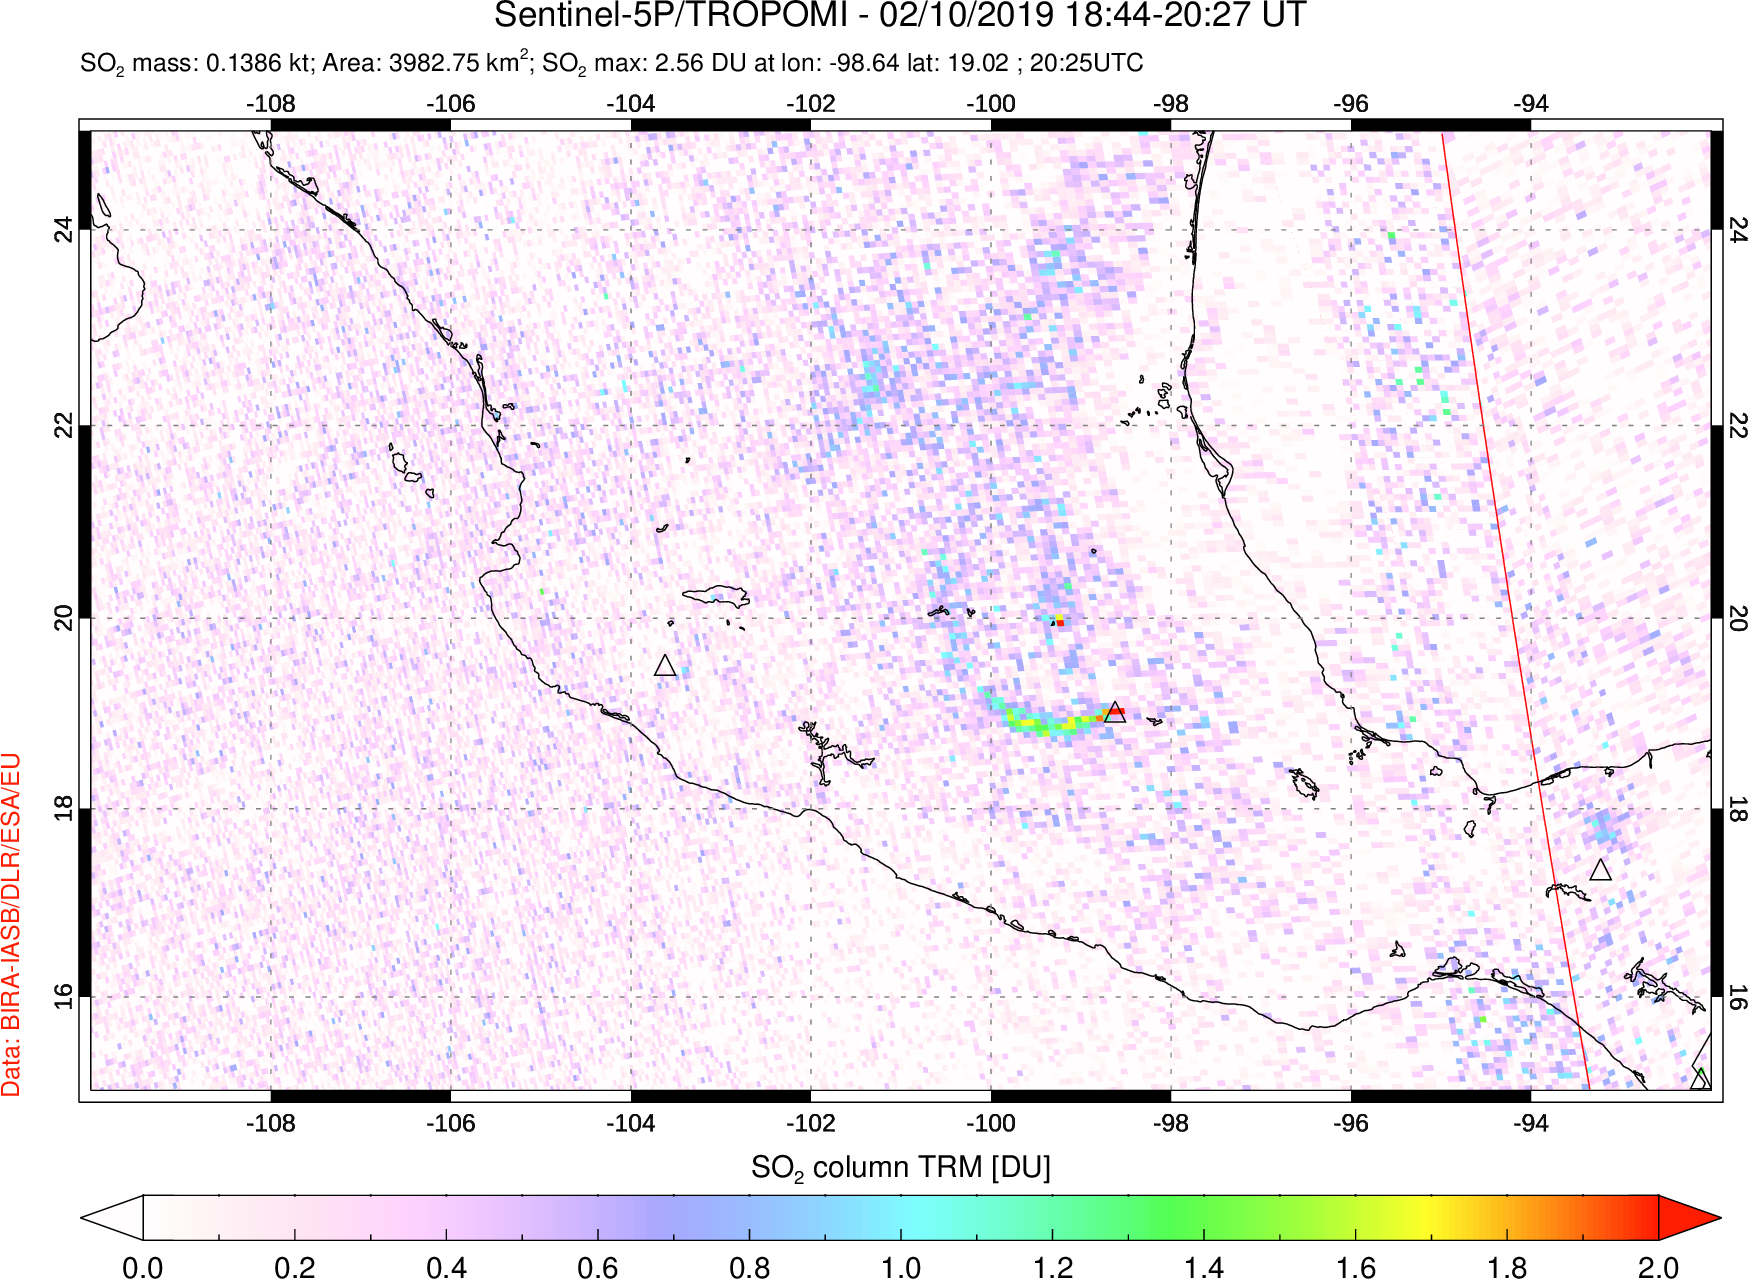 A sulfur dioxide image over Mexico on Feb 10, 2019.